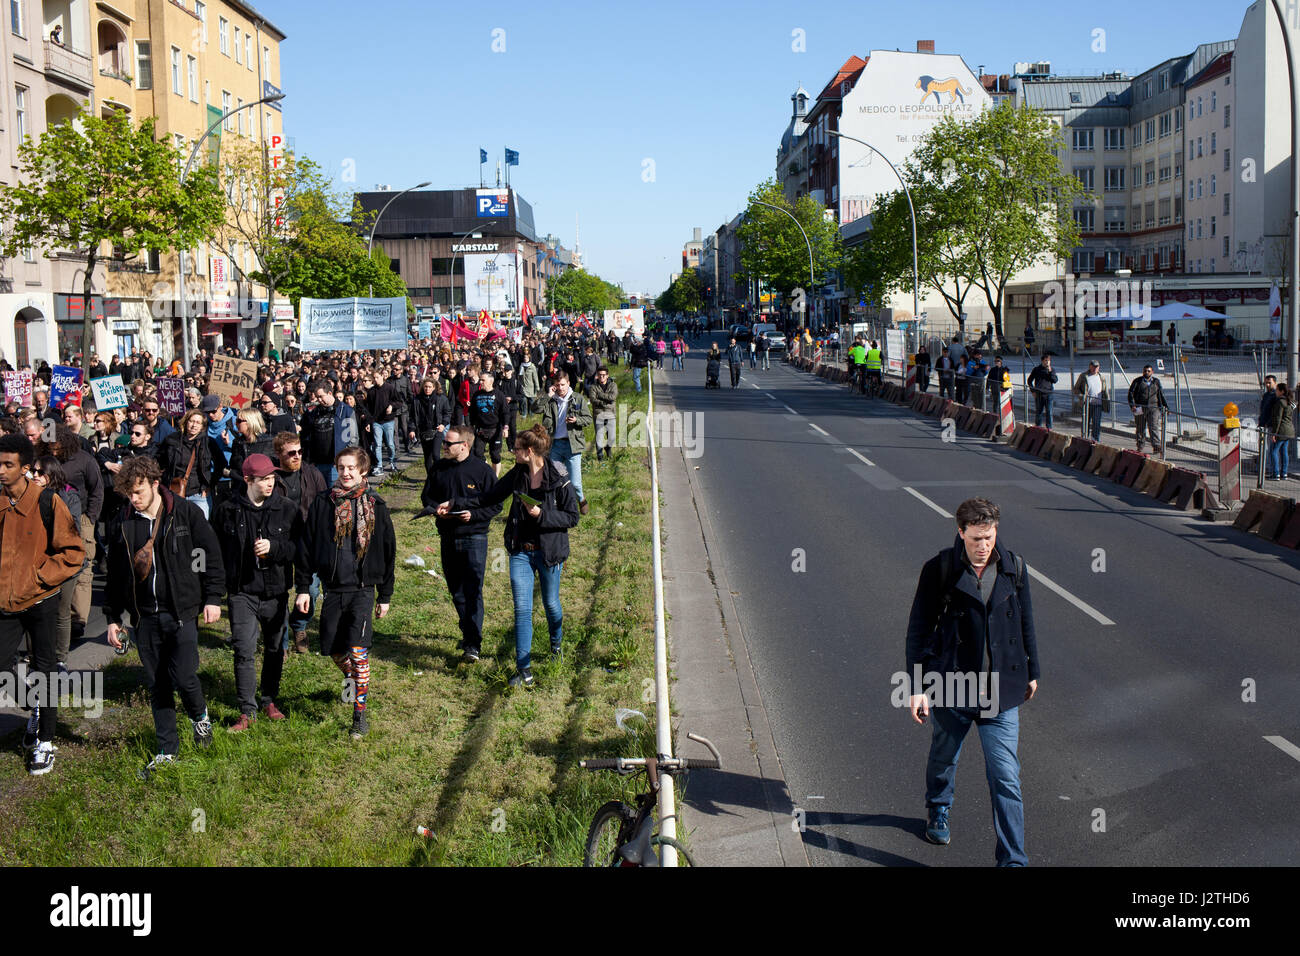 Berlin, Germany. 30th Apr, 2017. Simon Becker/Le Pictorium - Anti-capitalistic protest 'Organize!' - 30/04/2017 - Germany/Berlin/Berlin - On the eve of May Day, leftist groups and sympathisers protest against capitalism, racism and rent policies in the Wedding district of Berlin Stock Photo